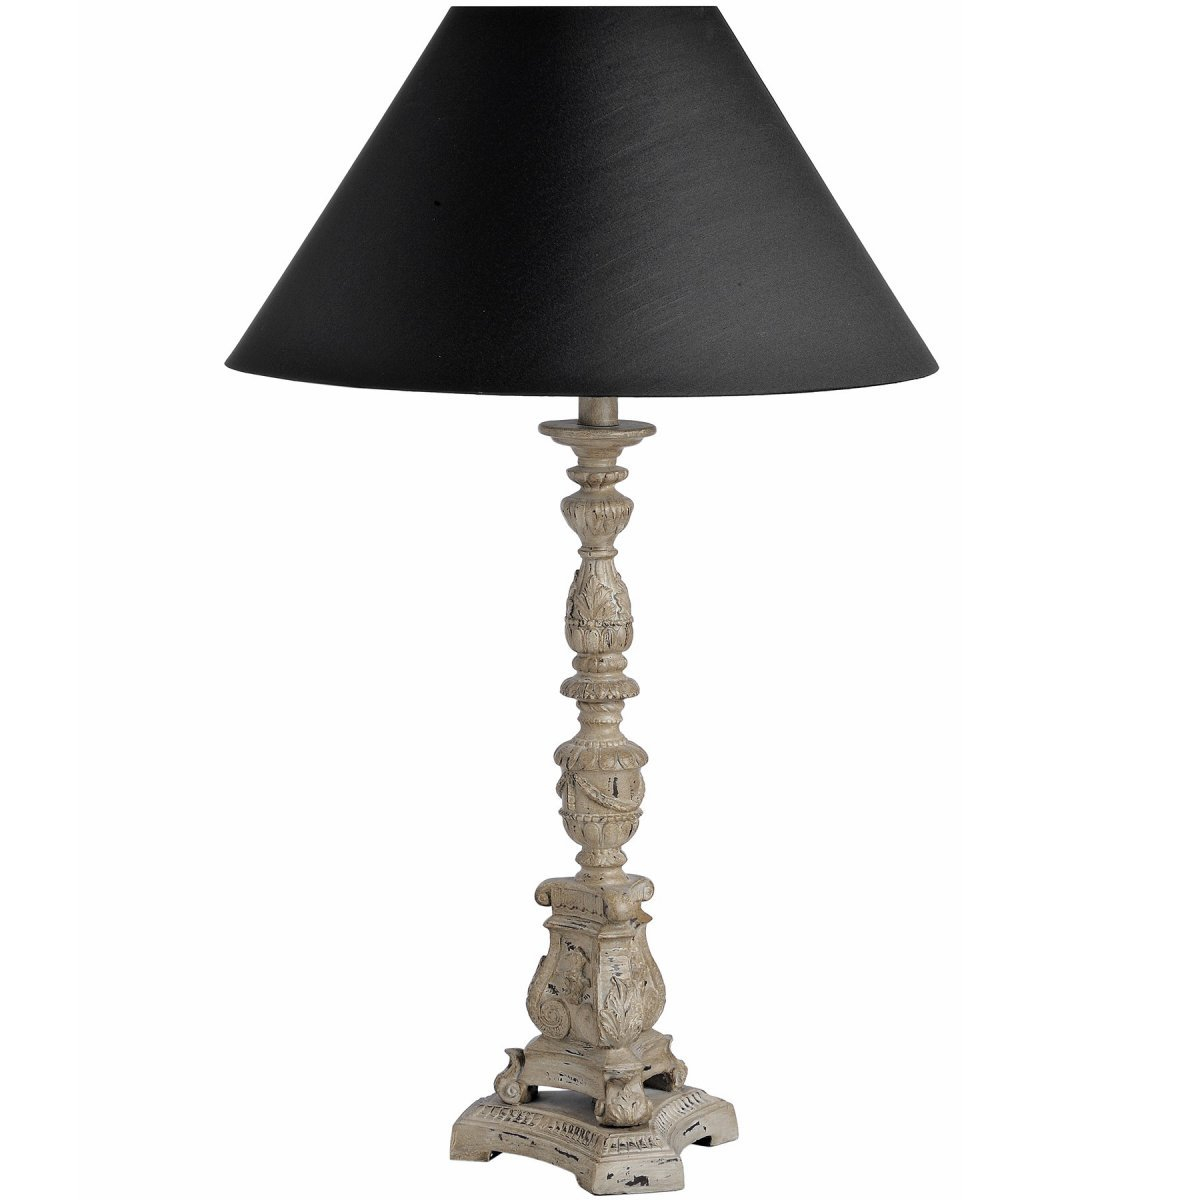 Bedside Table Lamp Black Best Inspiration For Table Lamp Black pertaining to dimensions 1200 X 1200